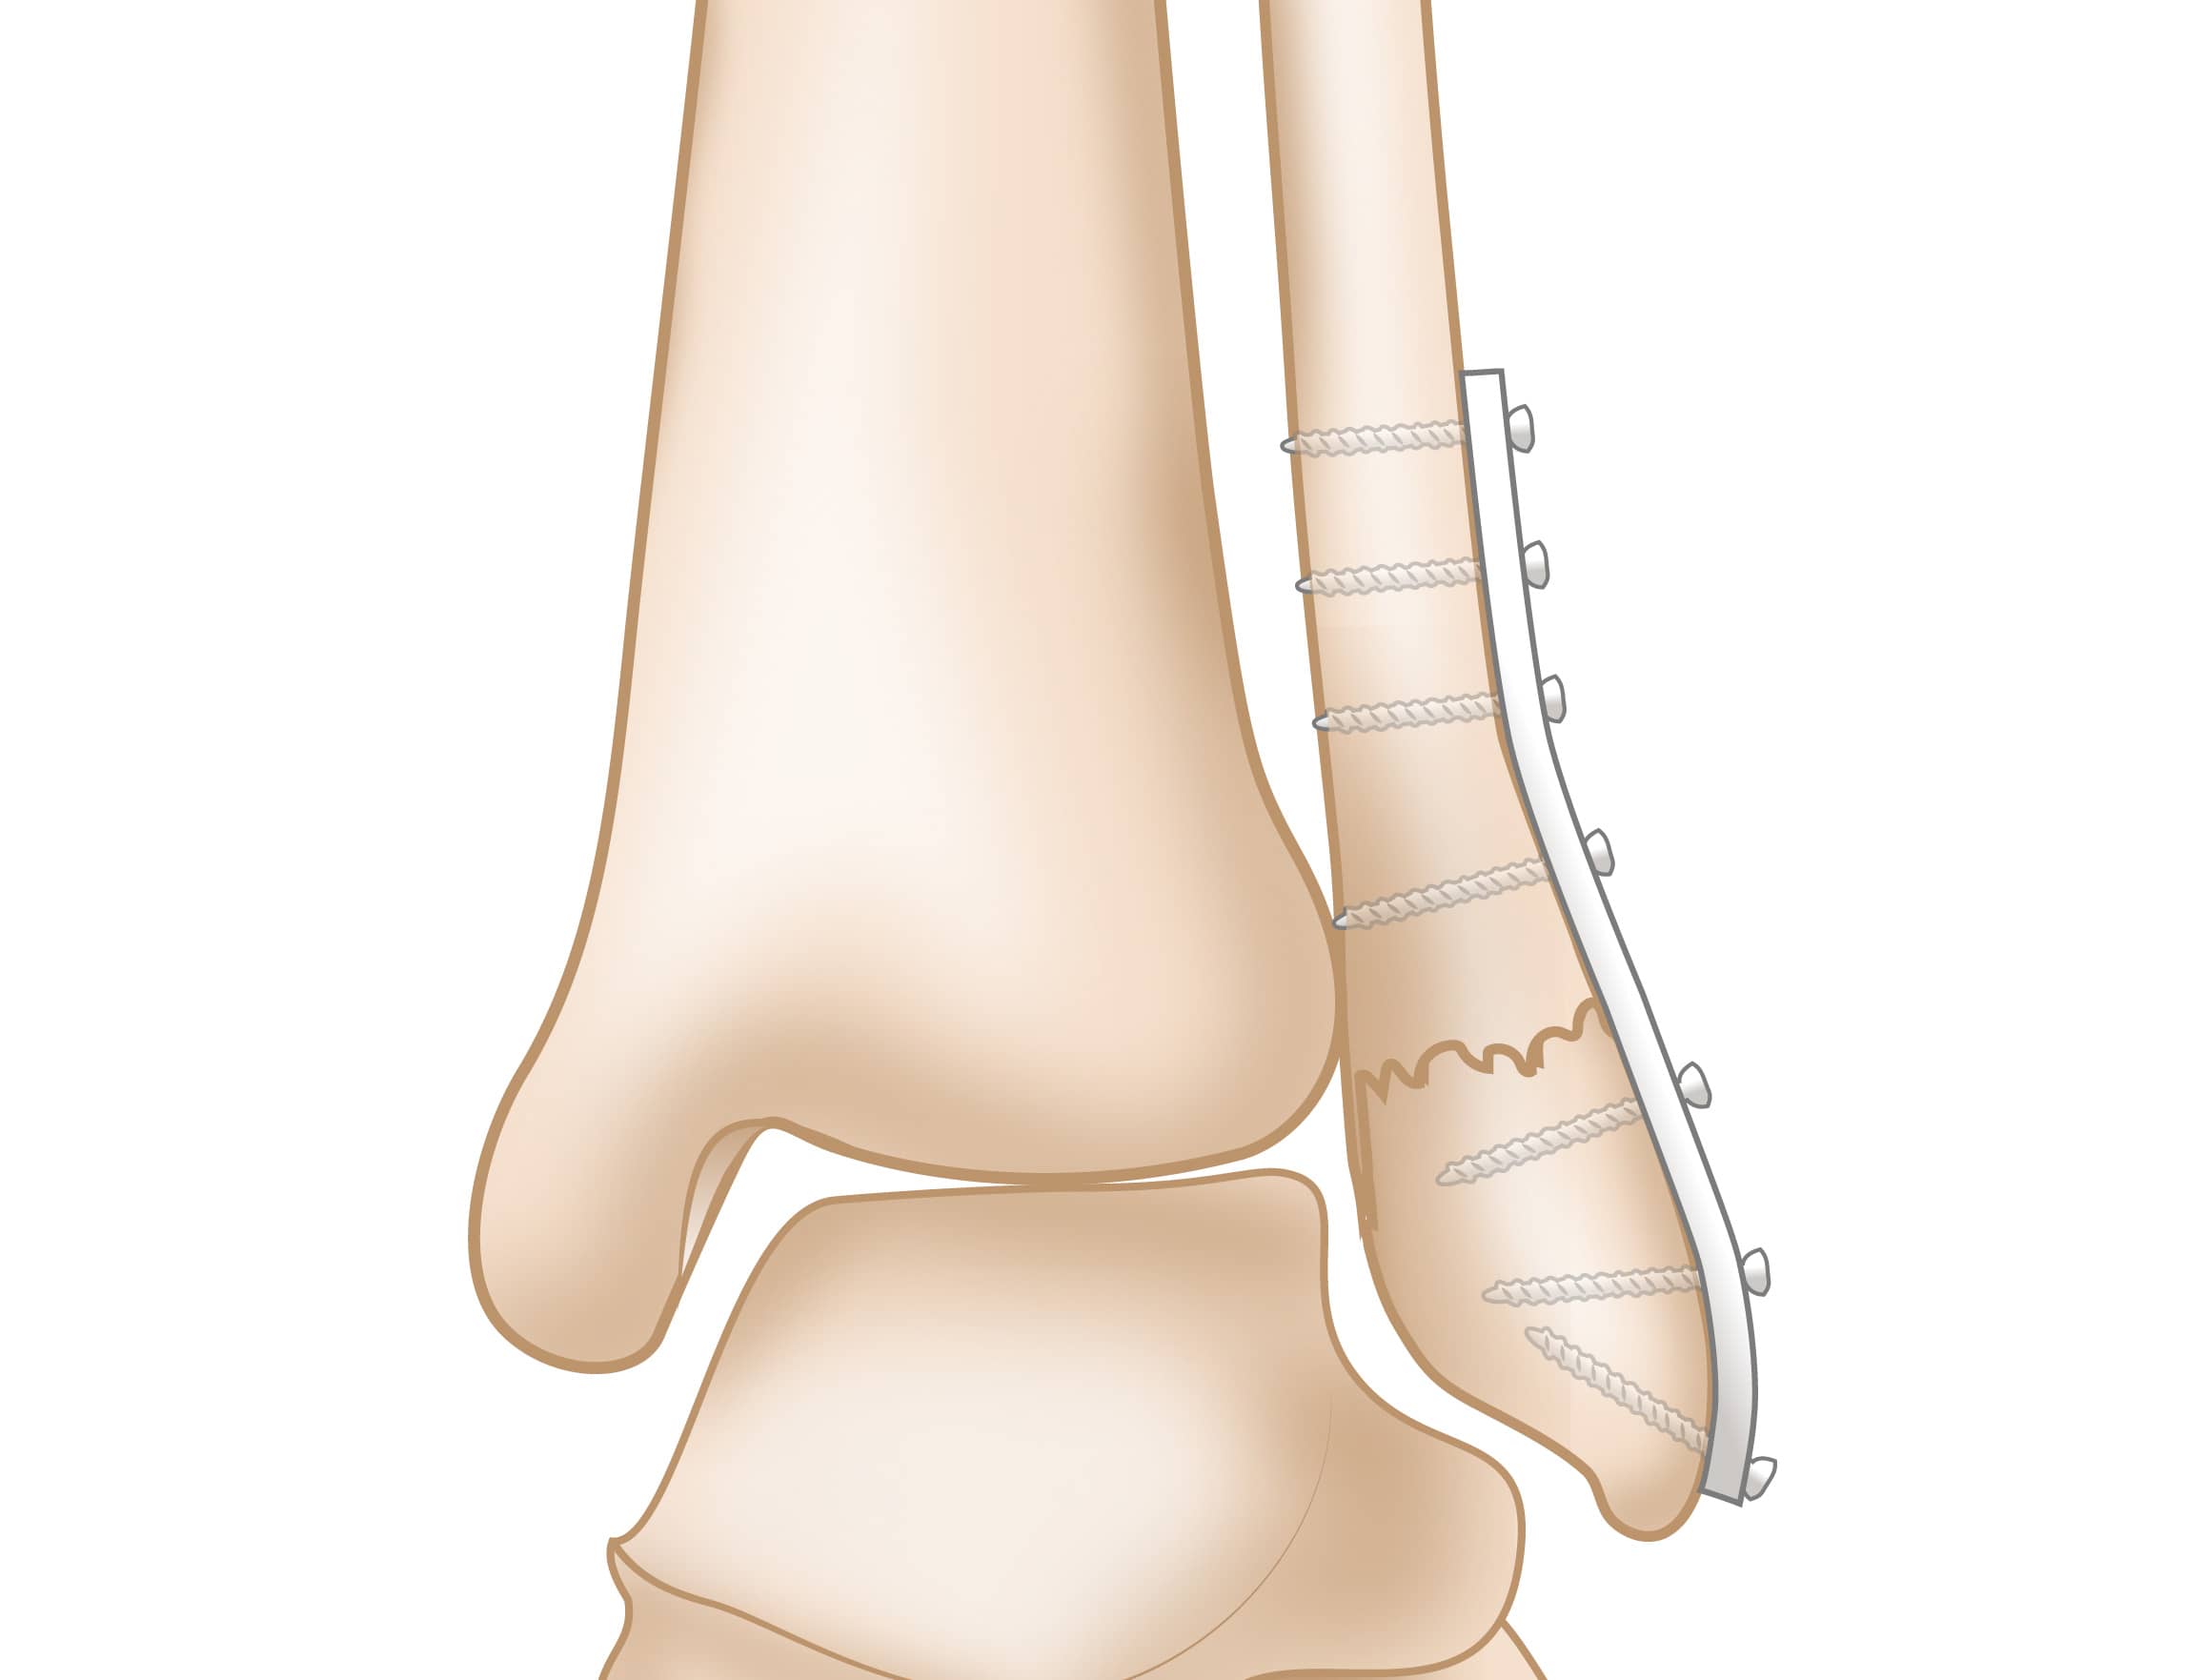 Surgically Repaired Displaced Lateral Malleolus Fracture